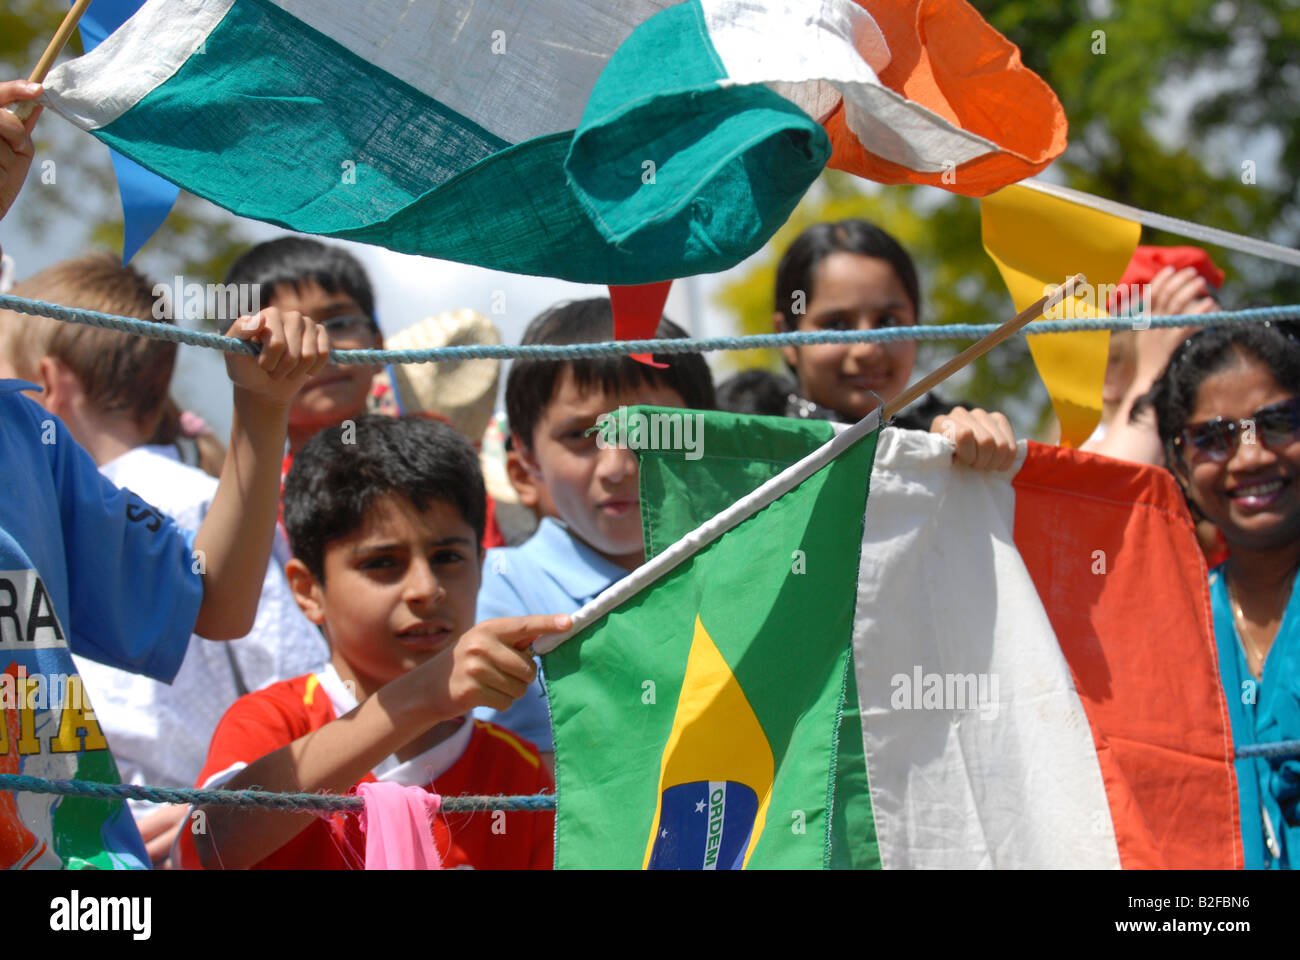 Multinational people and flags celebrate multiculturalism Stock Photo